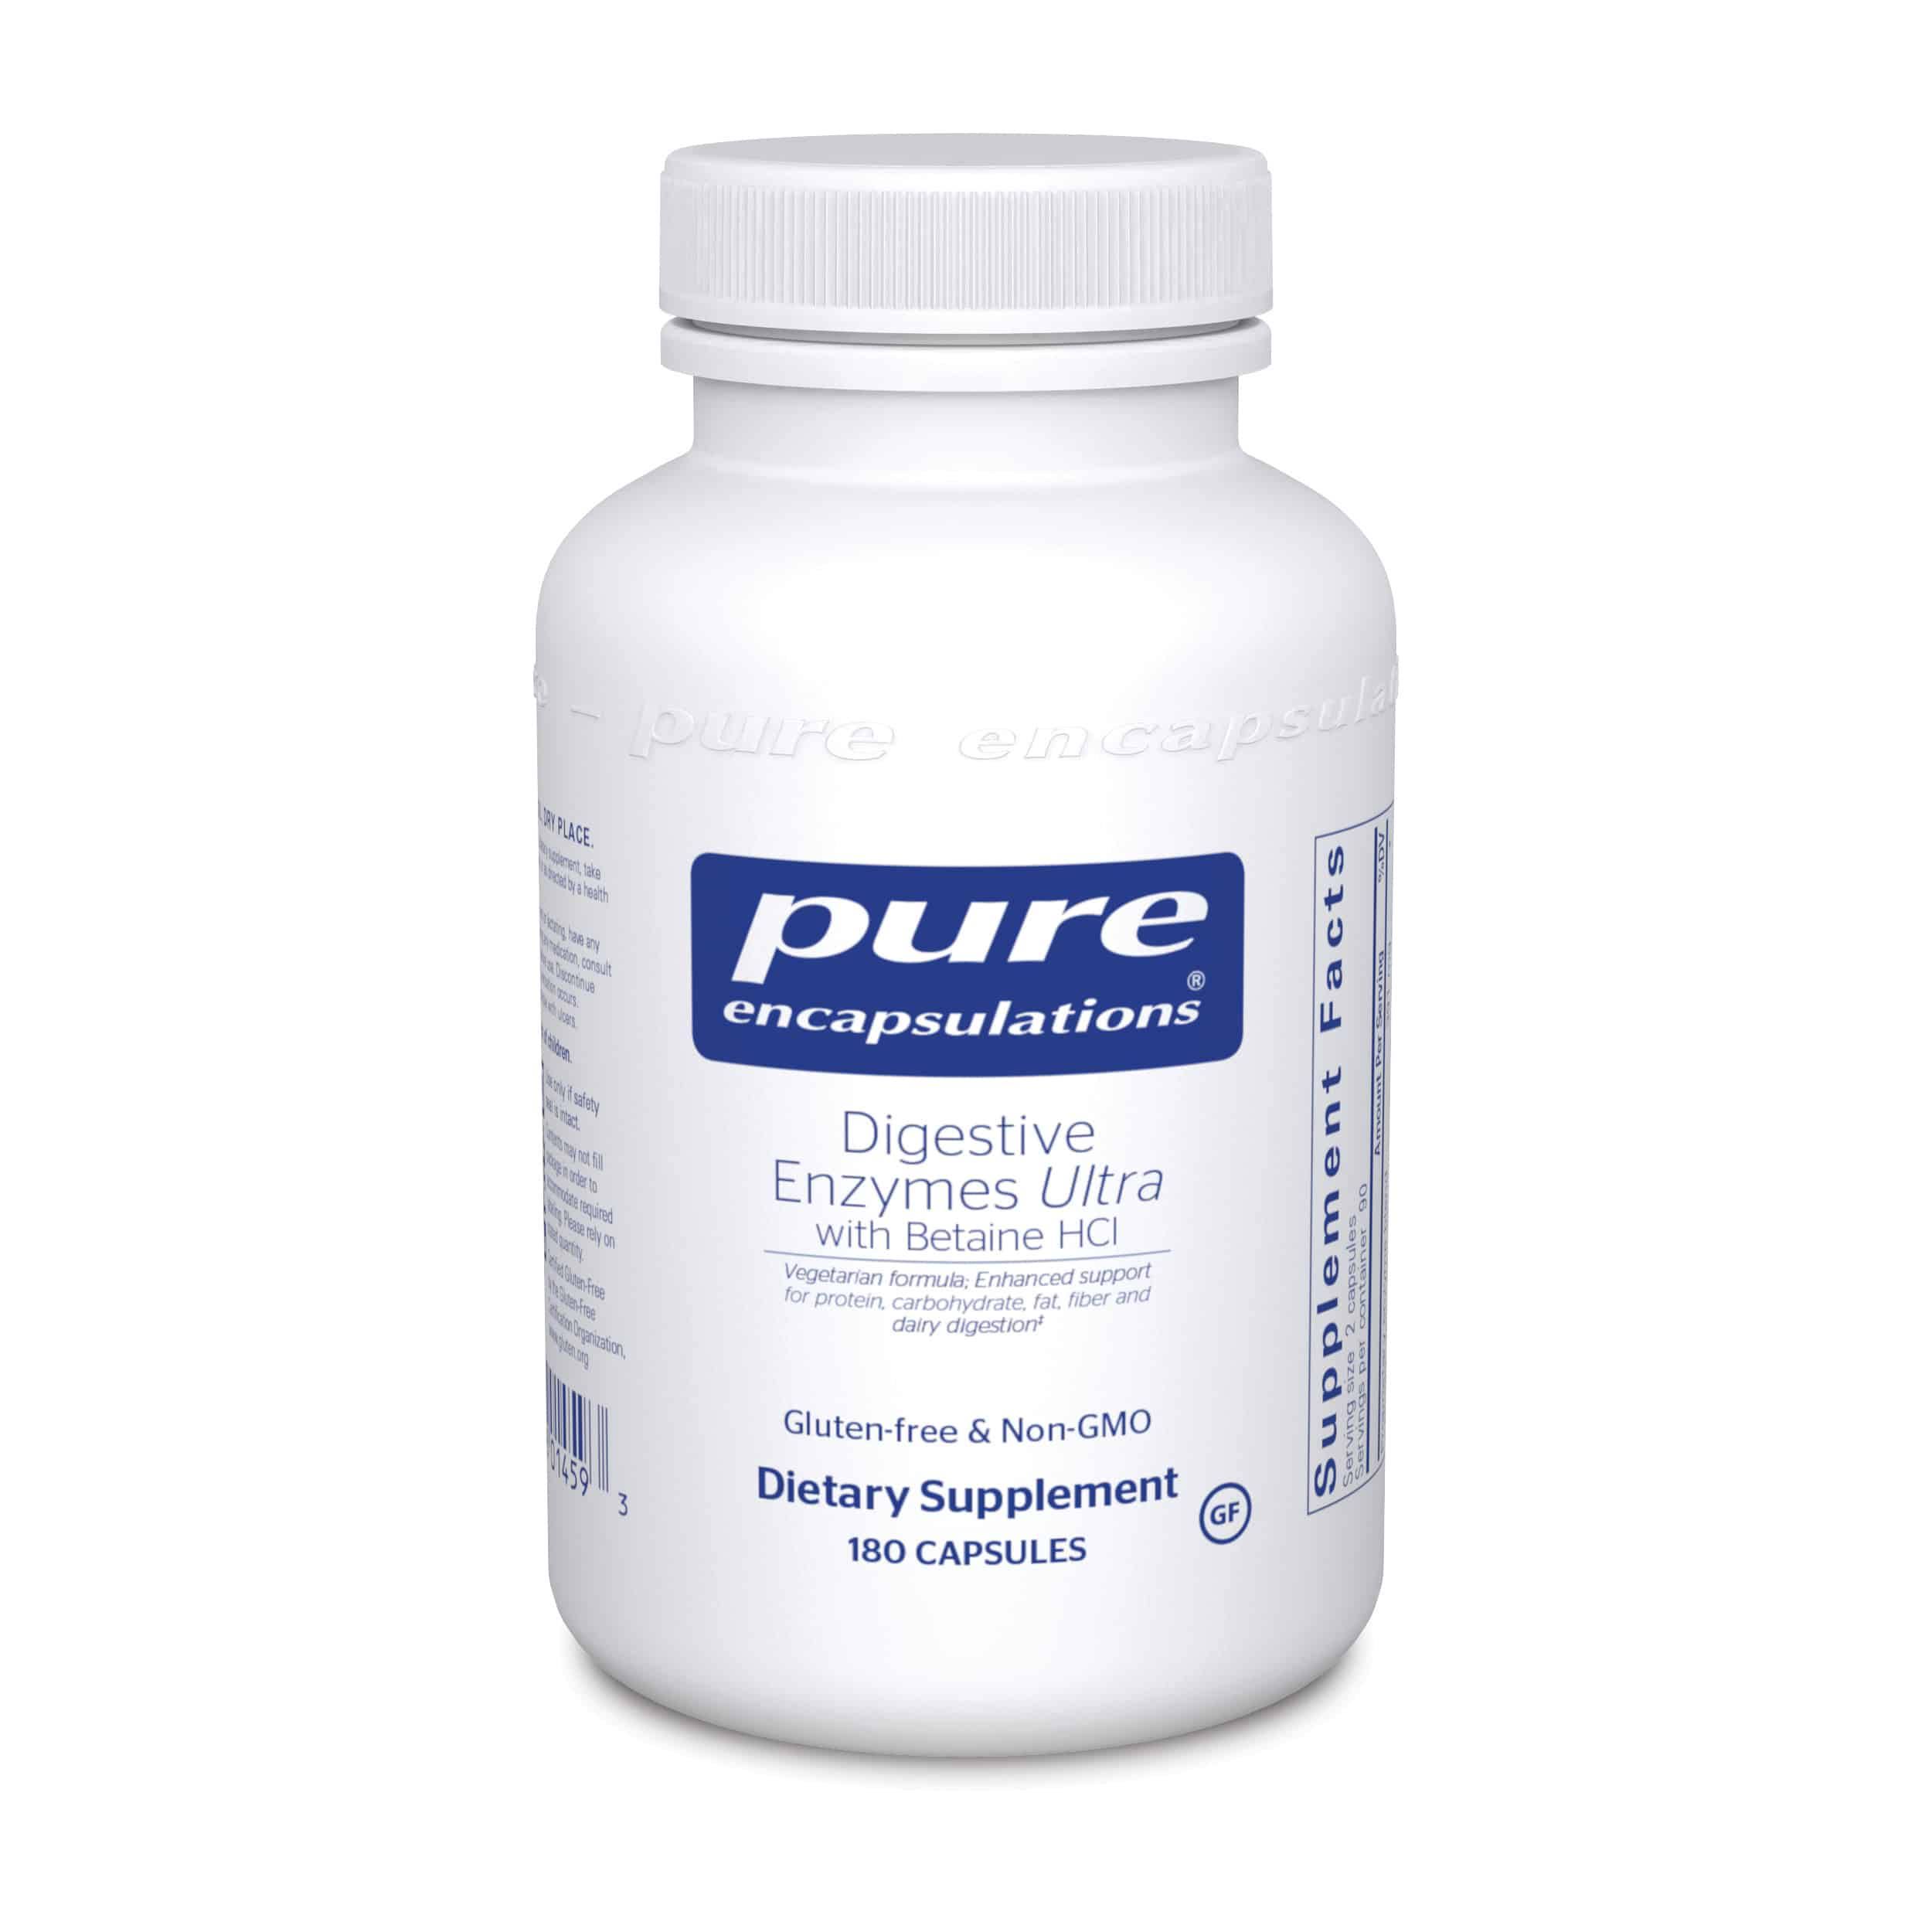 Pure Encapsulations Digestive Enzymes Ultra With Betaine HCL Capsules - 180ct